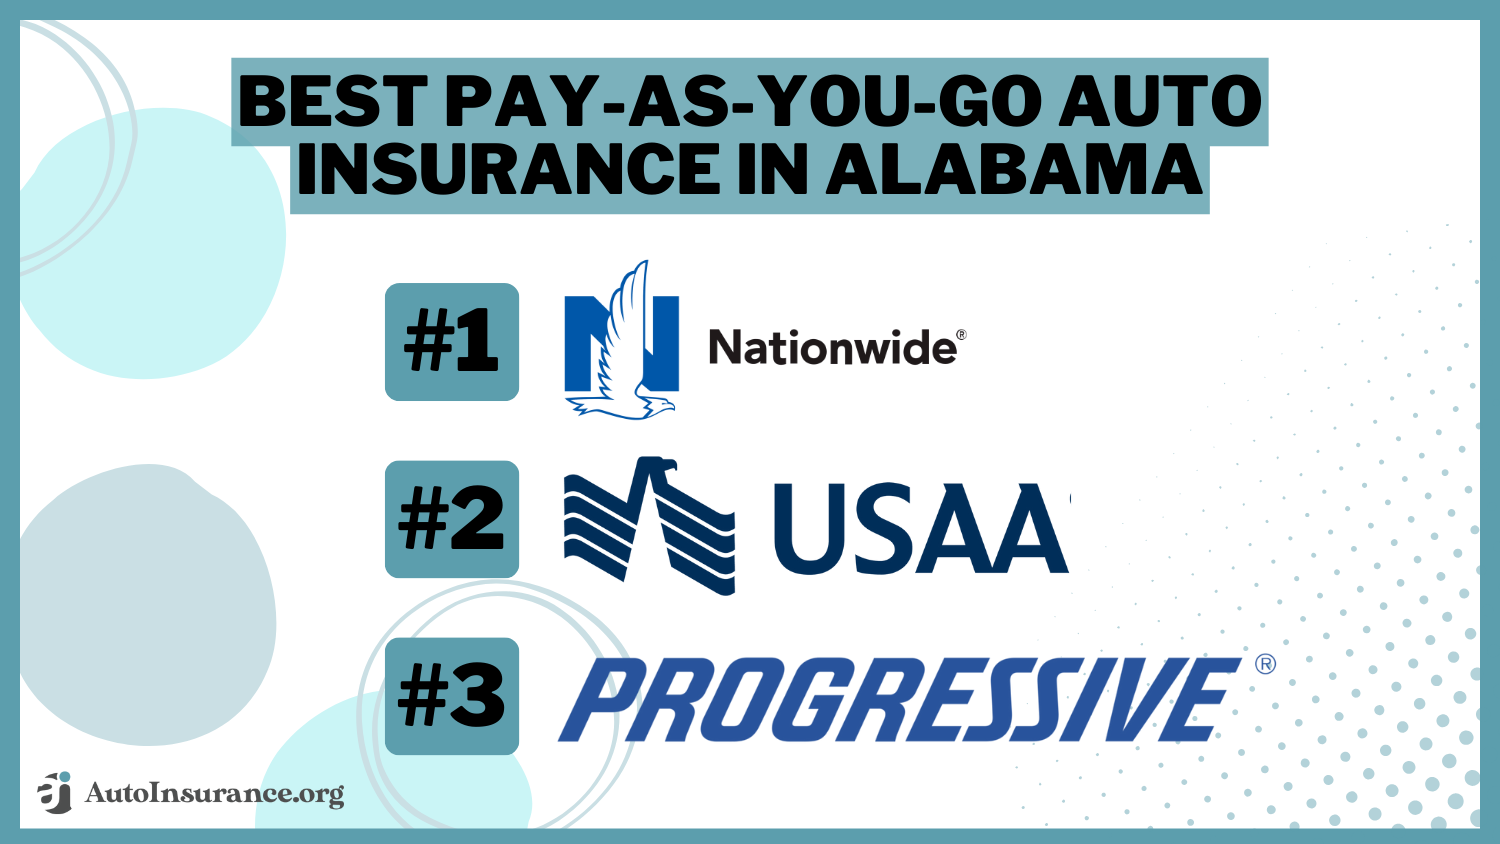 Best Pay-As-You-Go Auto Insurance in Alabama: Nationwide, USAA, Progressive